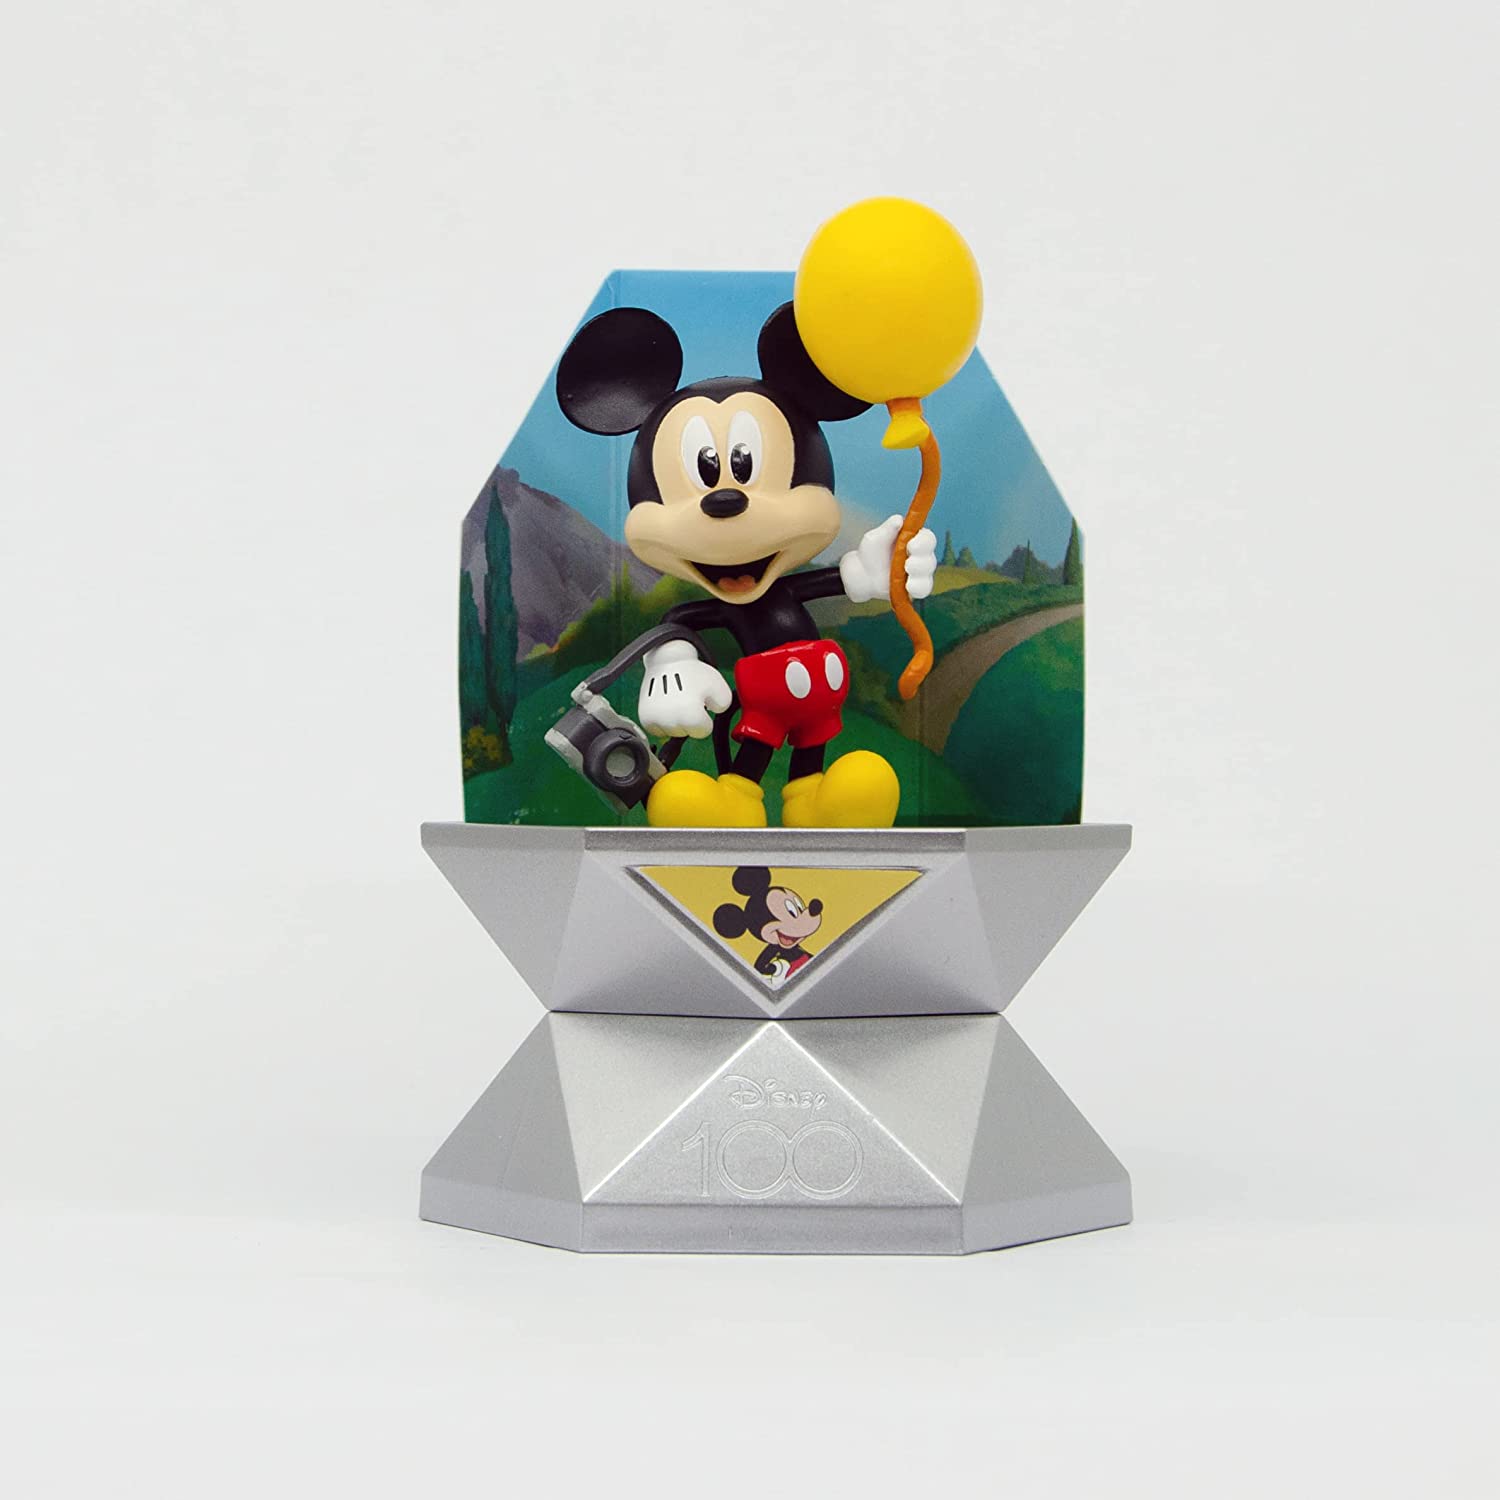 Yume Disney 100 Series Mystery Capsule Blind Box with Surprise Characters Figurines Toys 2 Pack